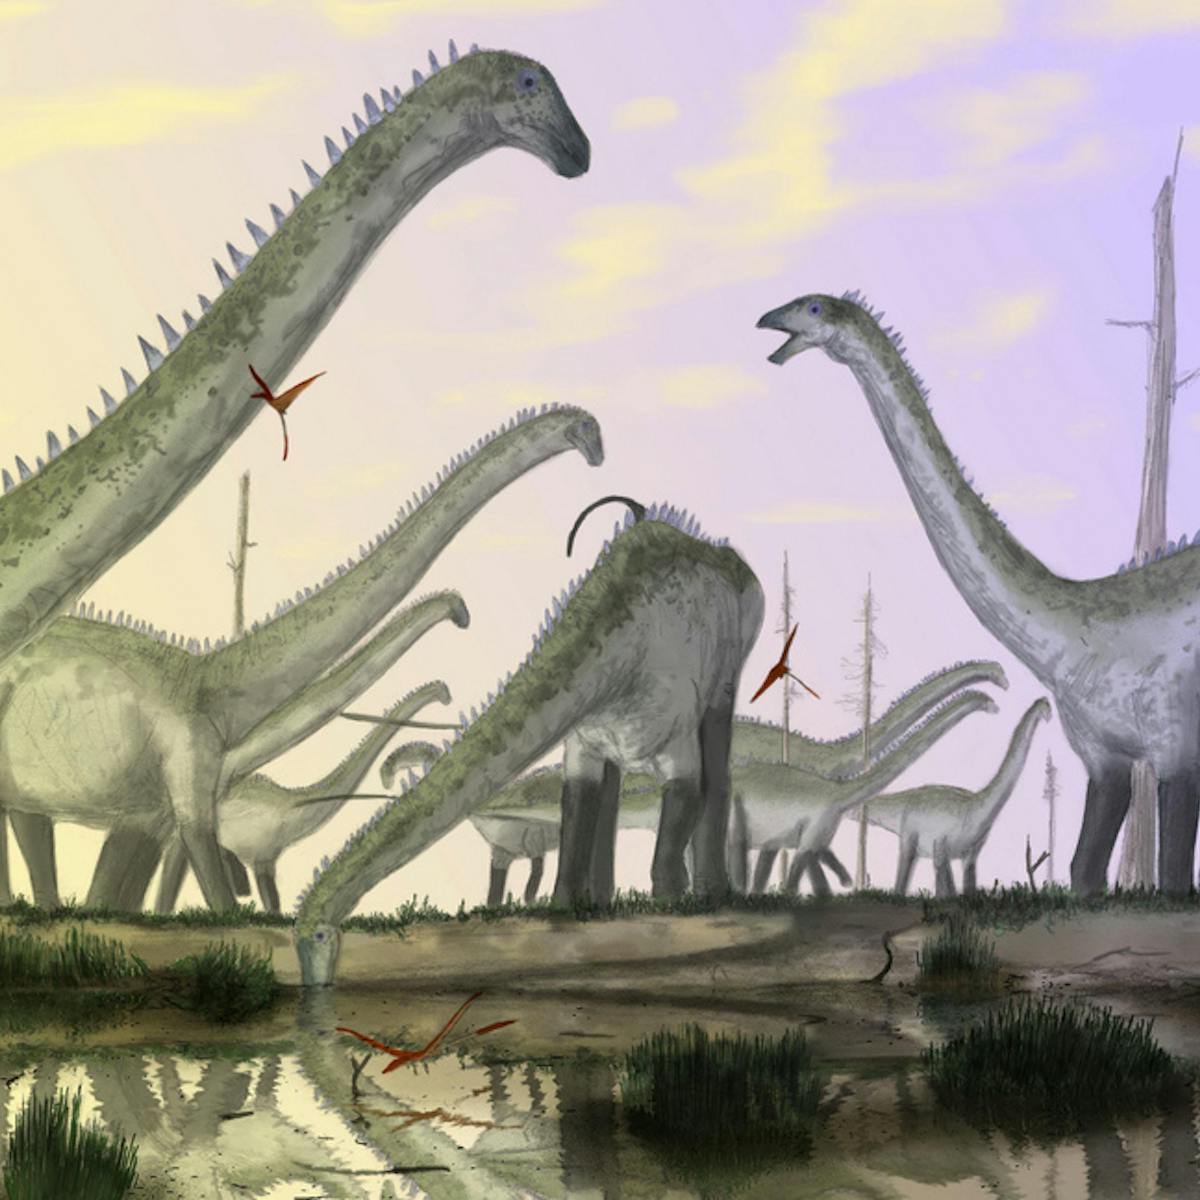 Necks question ... how did the biggest dinosaurs get so big?